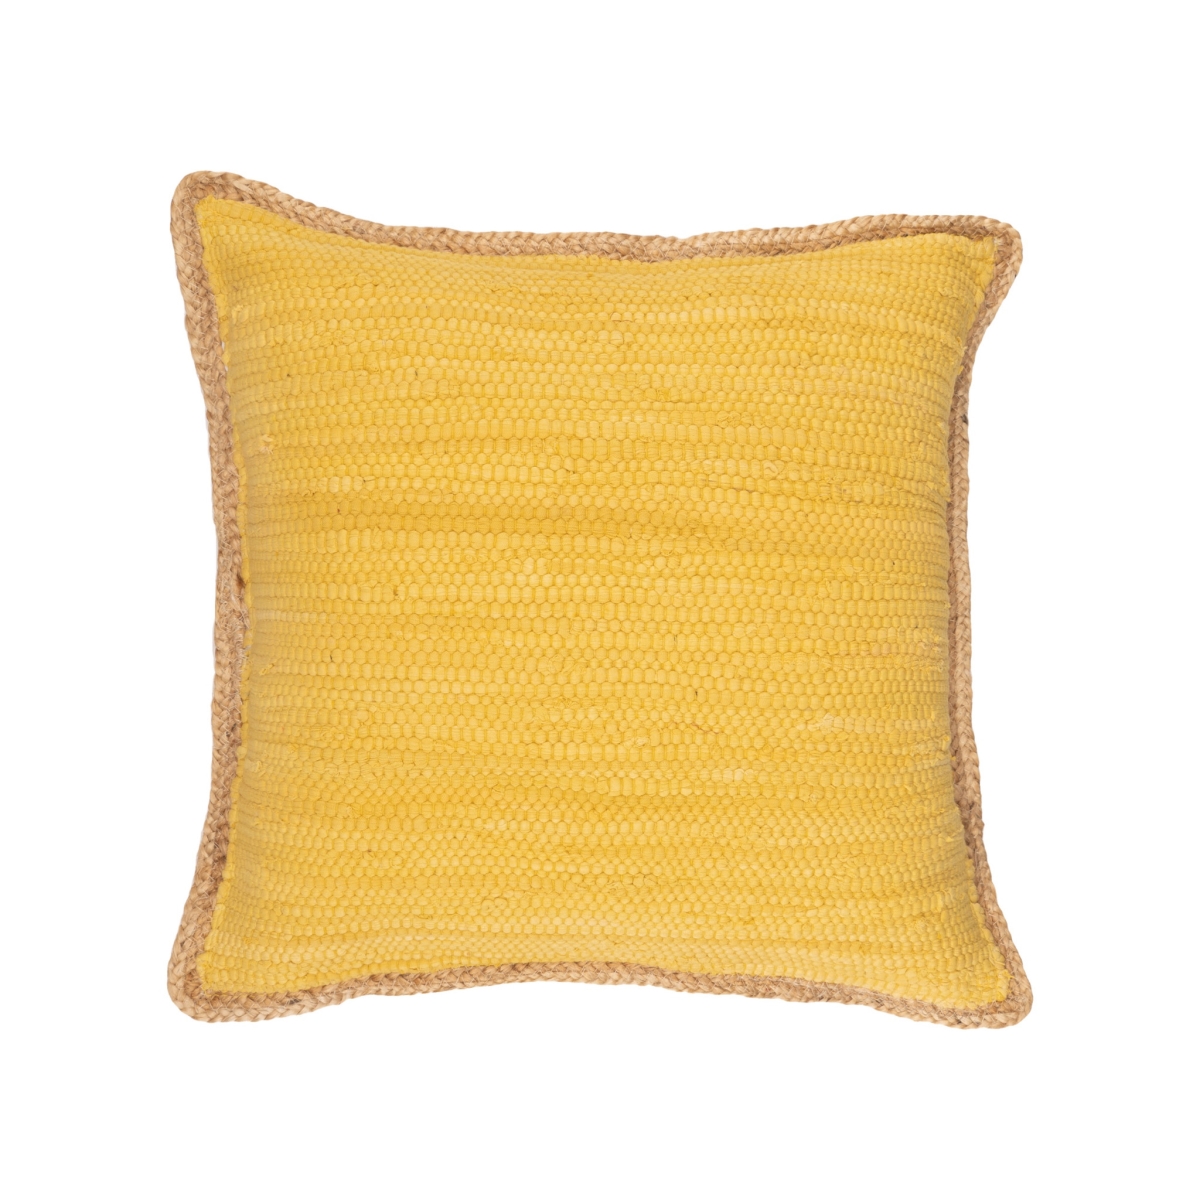 Picture of HomeRoots 517108 20 x 20 in. Yellow & Beige Cotton Blend Zippered Pillow